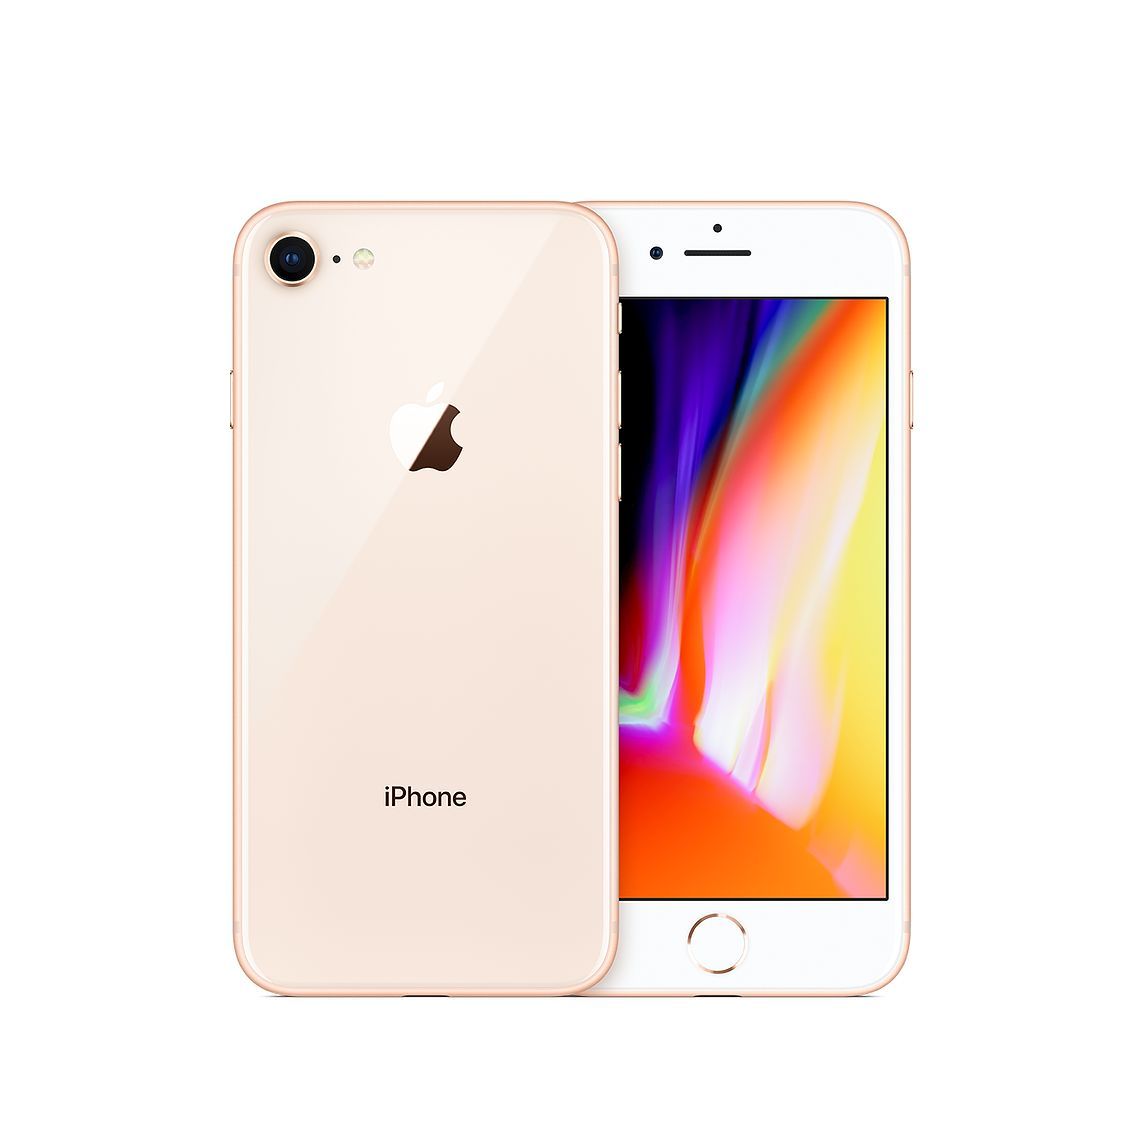 iPhone 8 - Gold